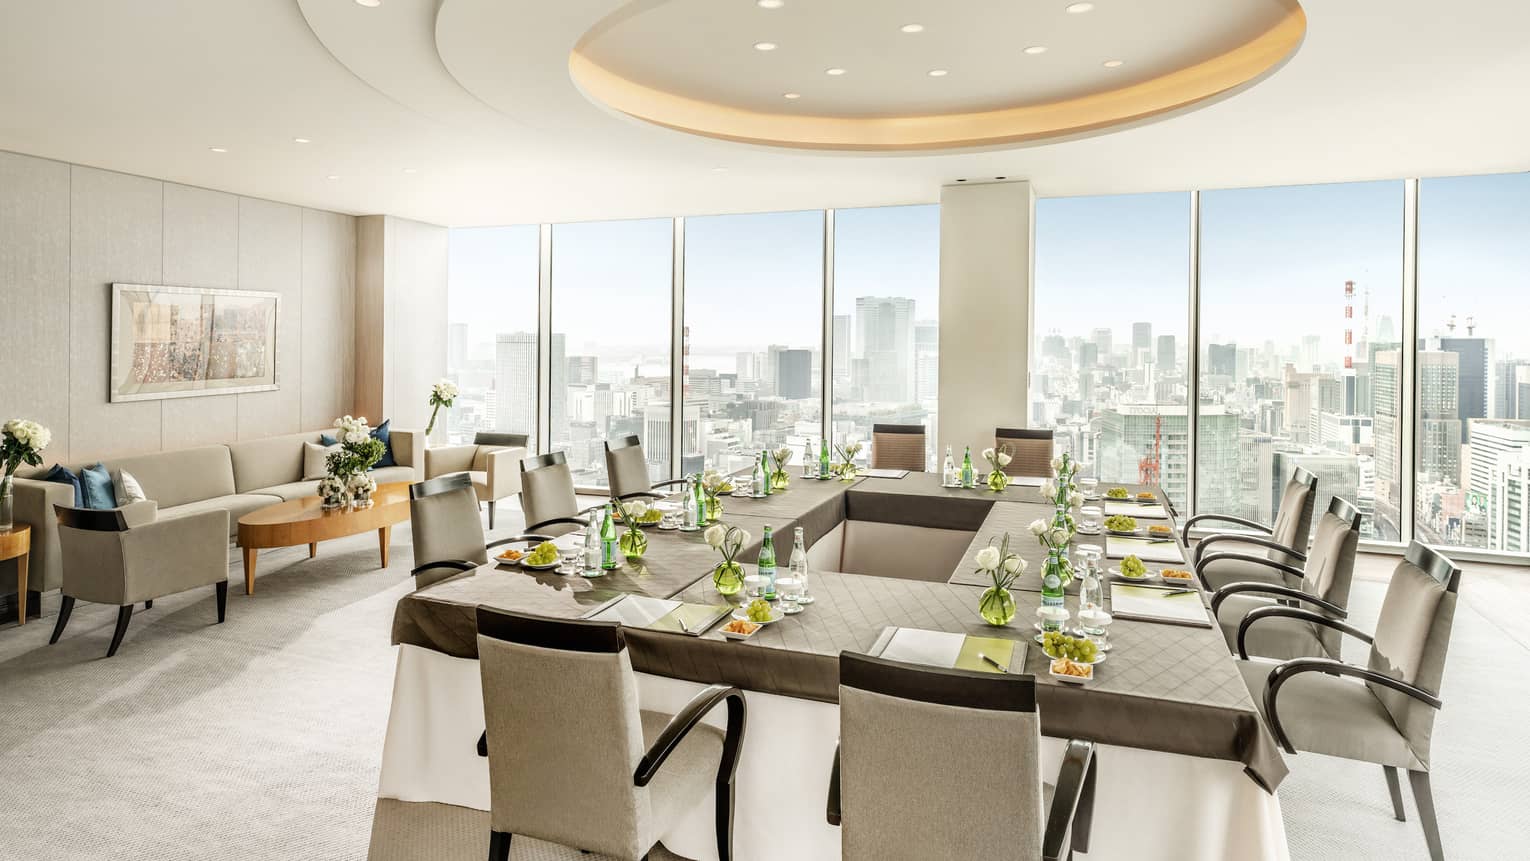 Executive Dining Room with hollow square table, floor-to-ceiling windows with city views